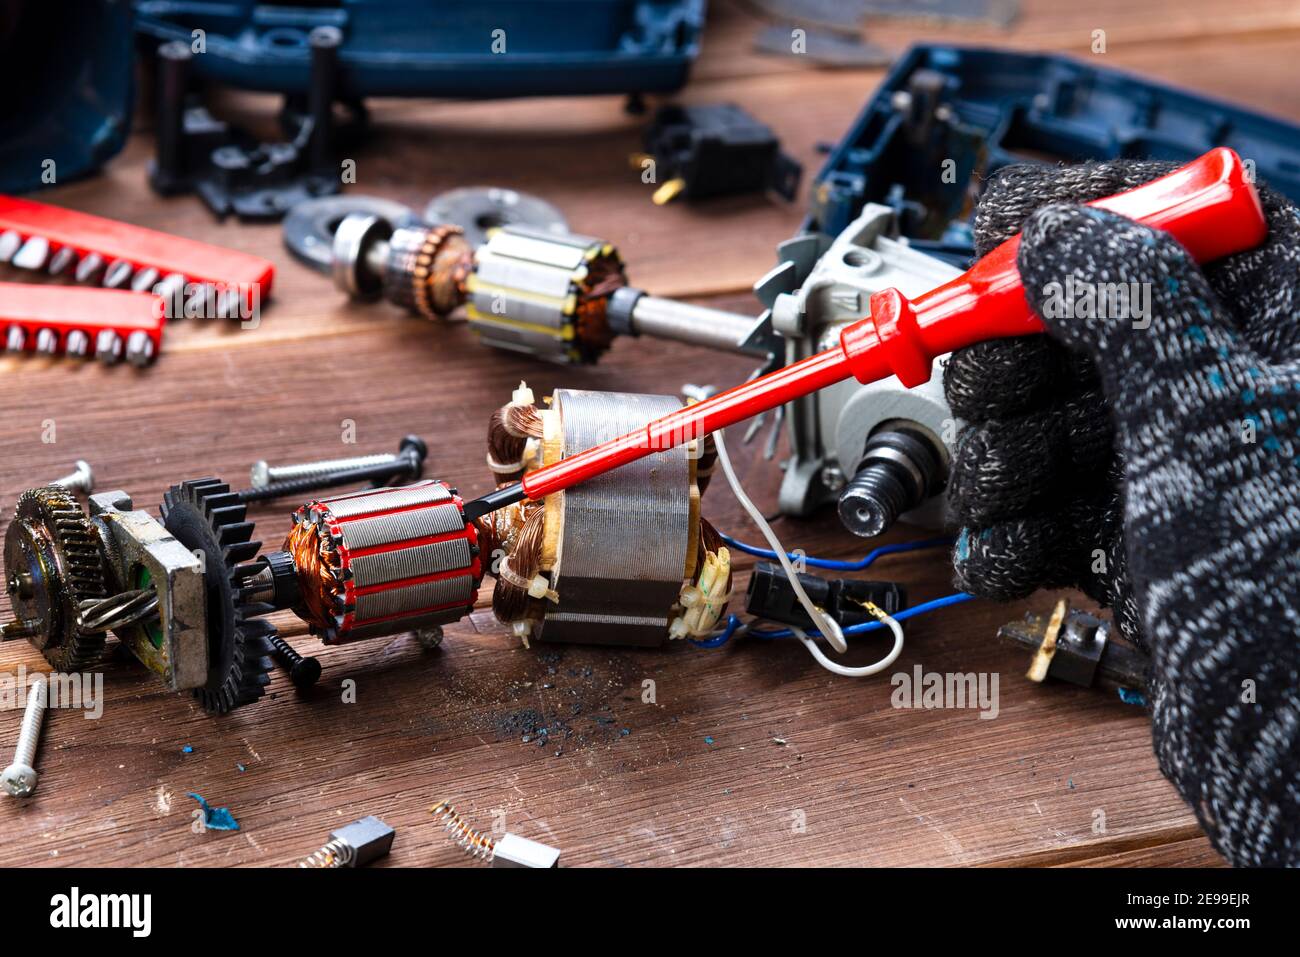 Power tool repair. Details of electrical appliance and repair tools on a wooden table in a repair shop Stock Photo